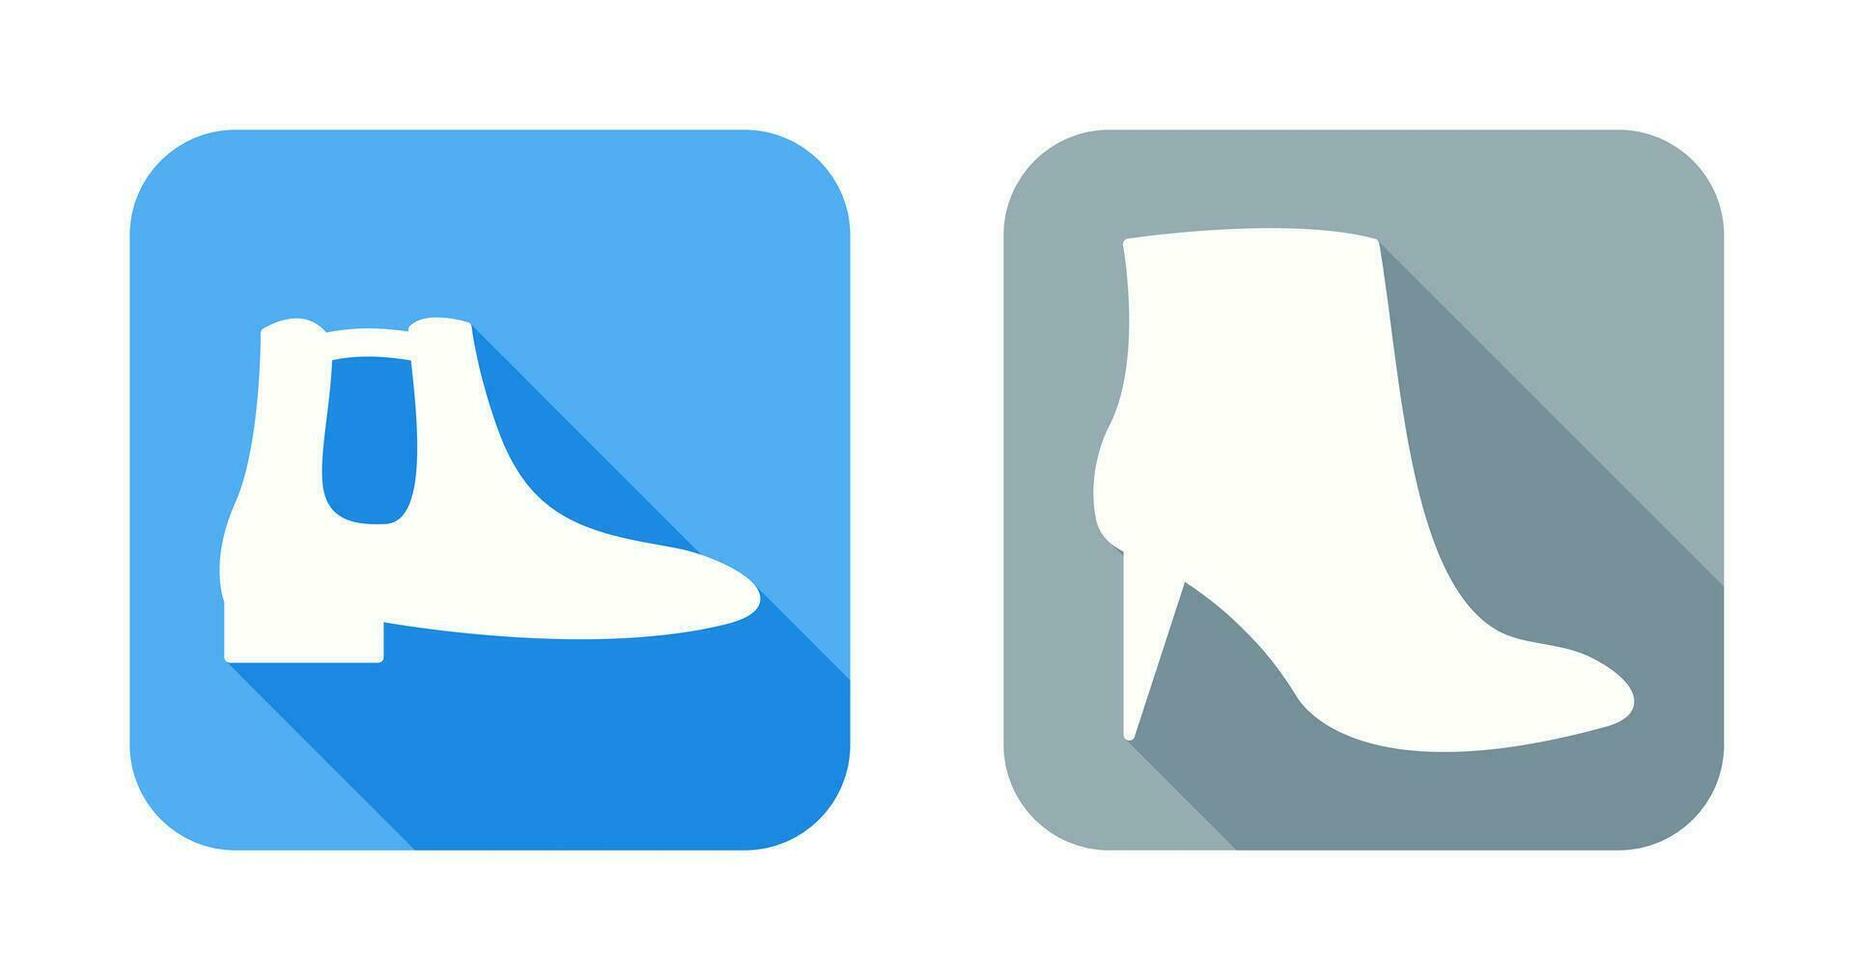 Men Boots and high heels Icon vector